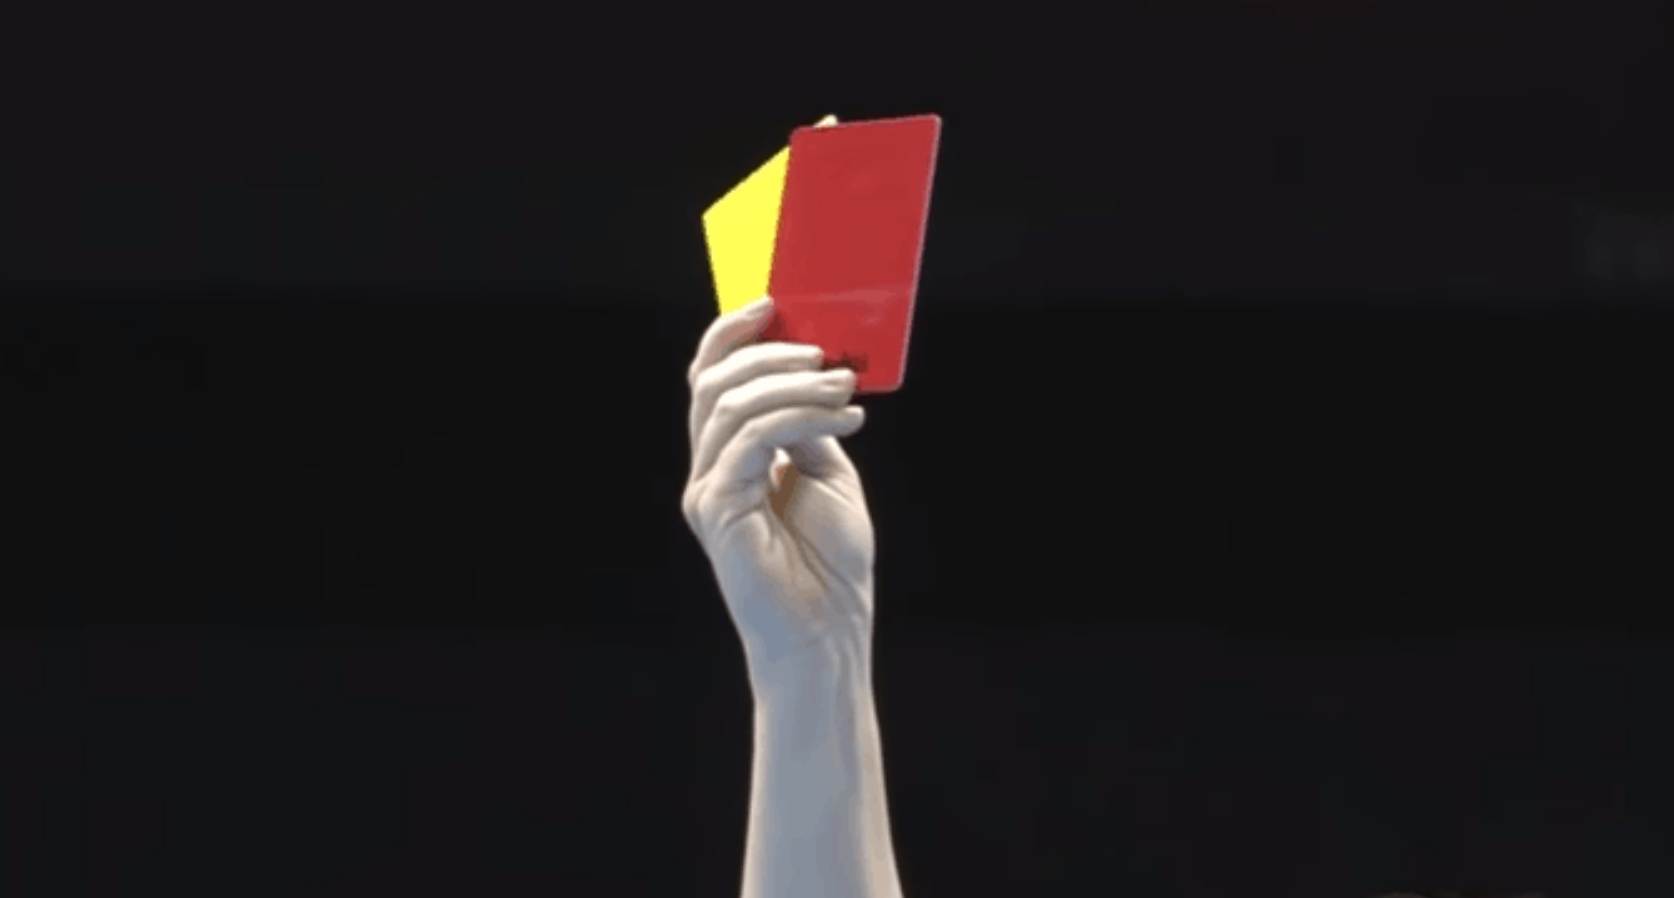 Red and yellow card penalties for tourists